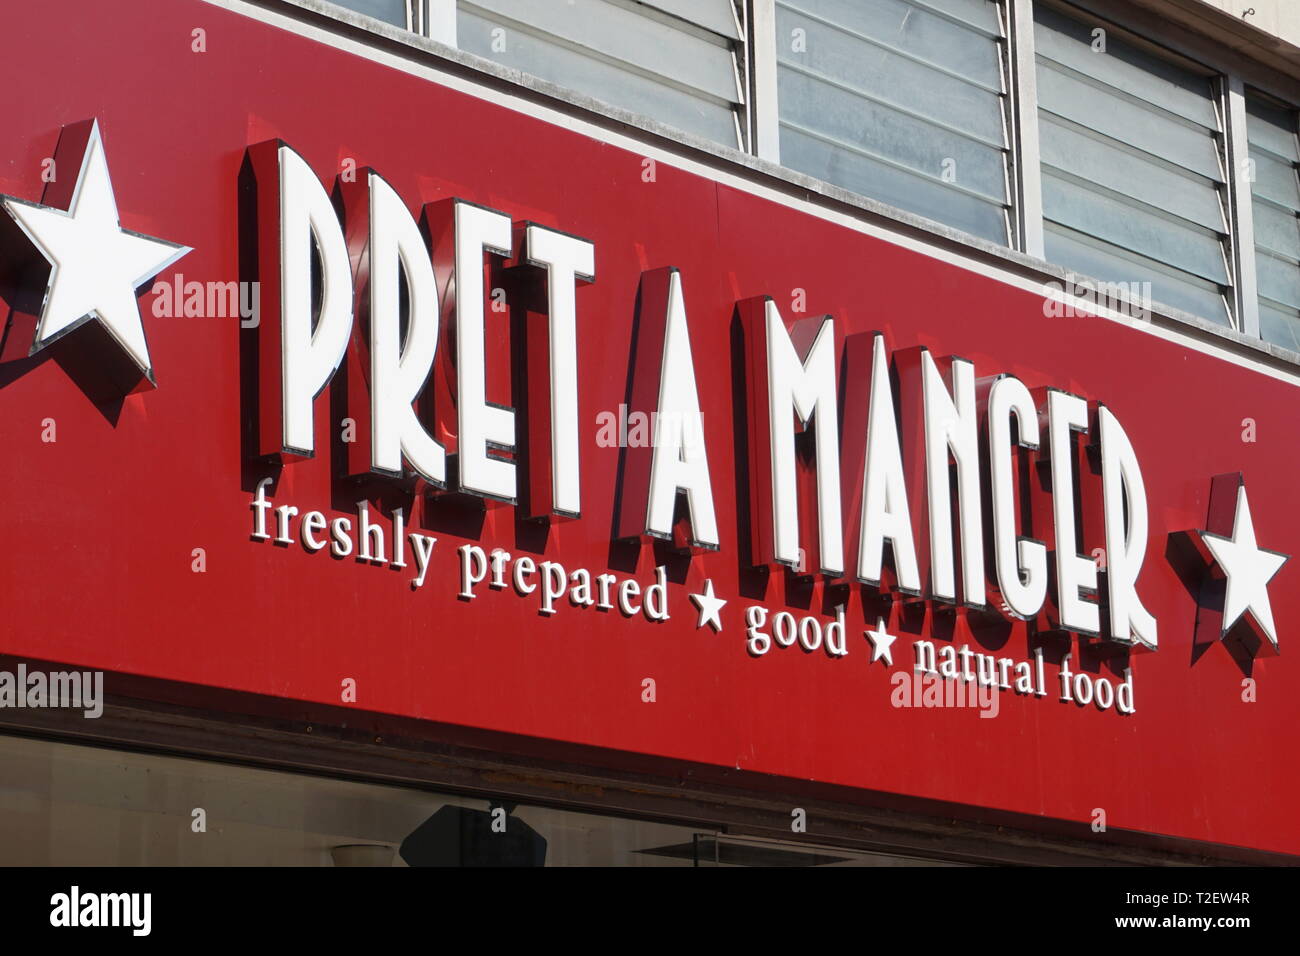 Pret a manger fast food store in Broad Street, Reading, UK Stock Photo